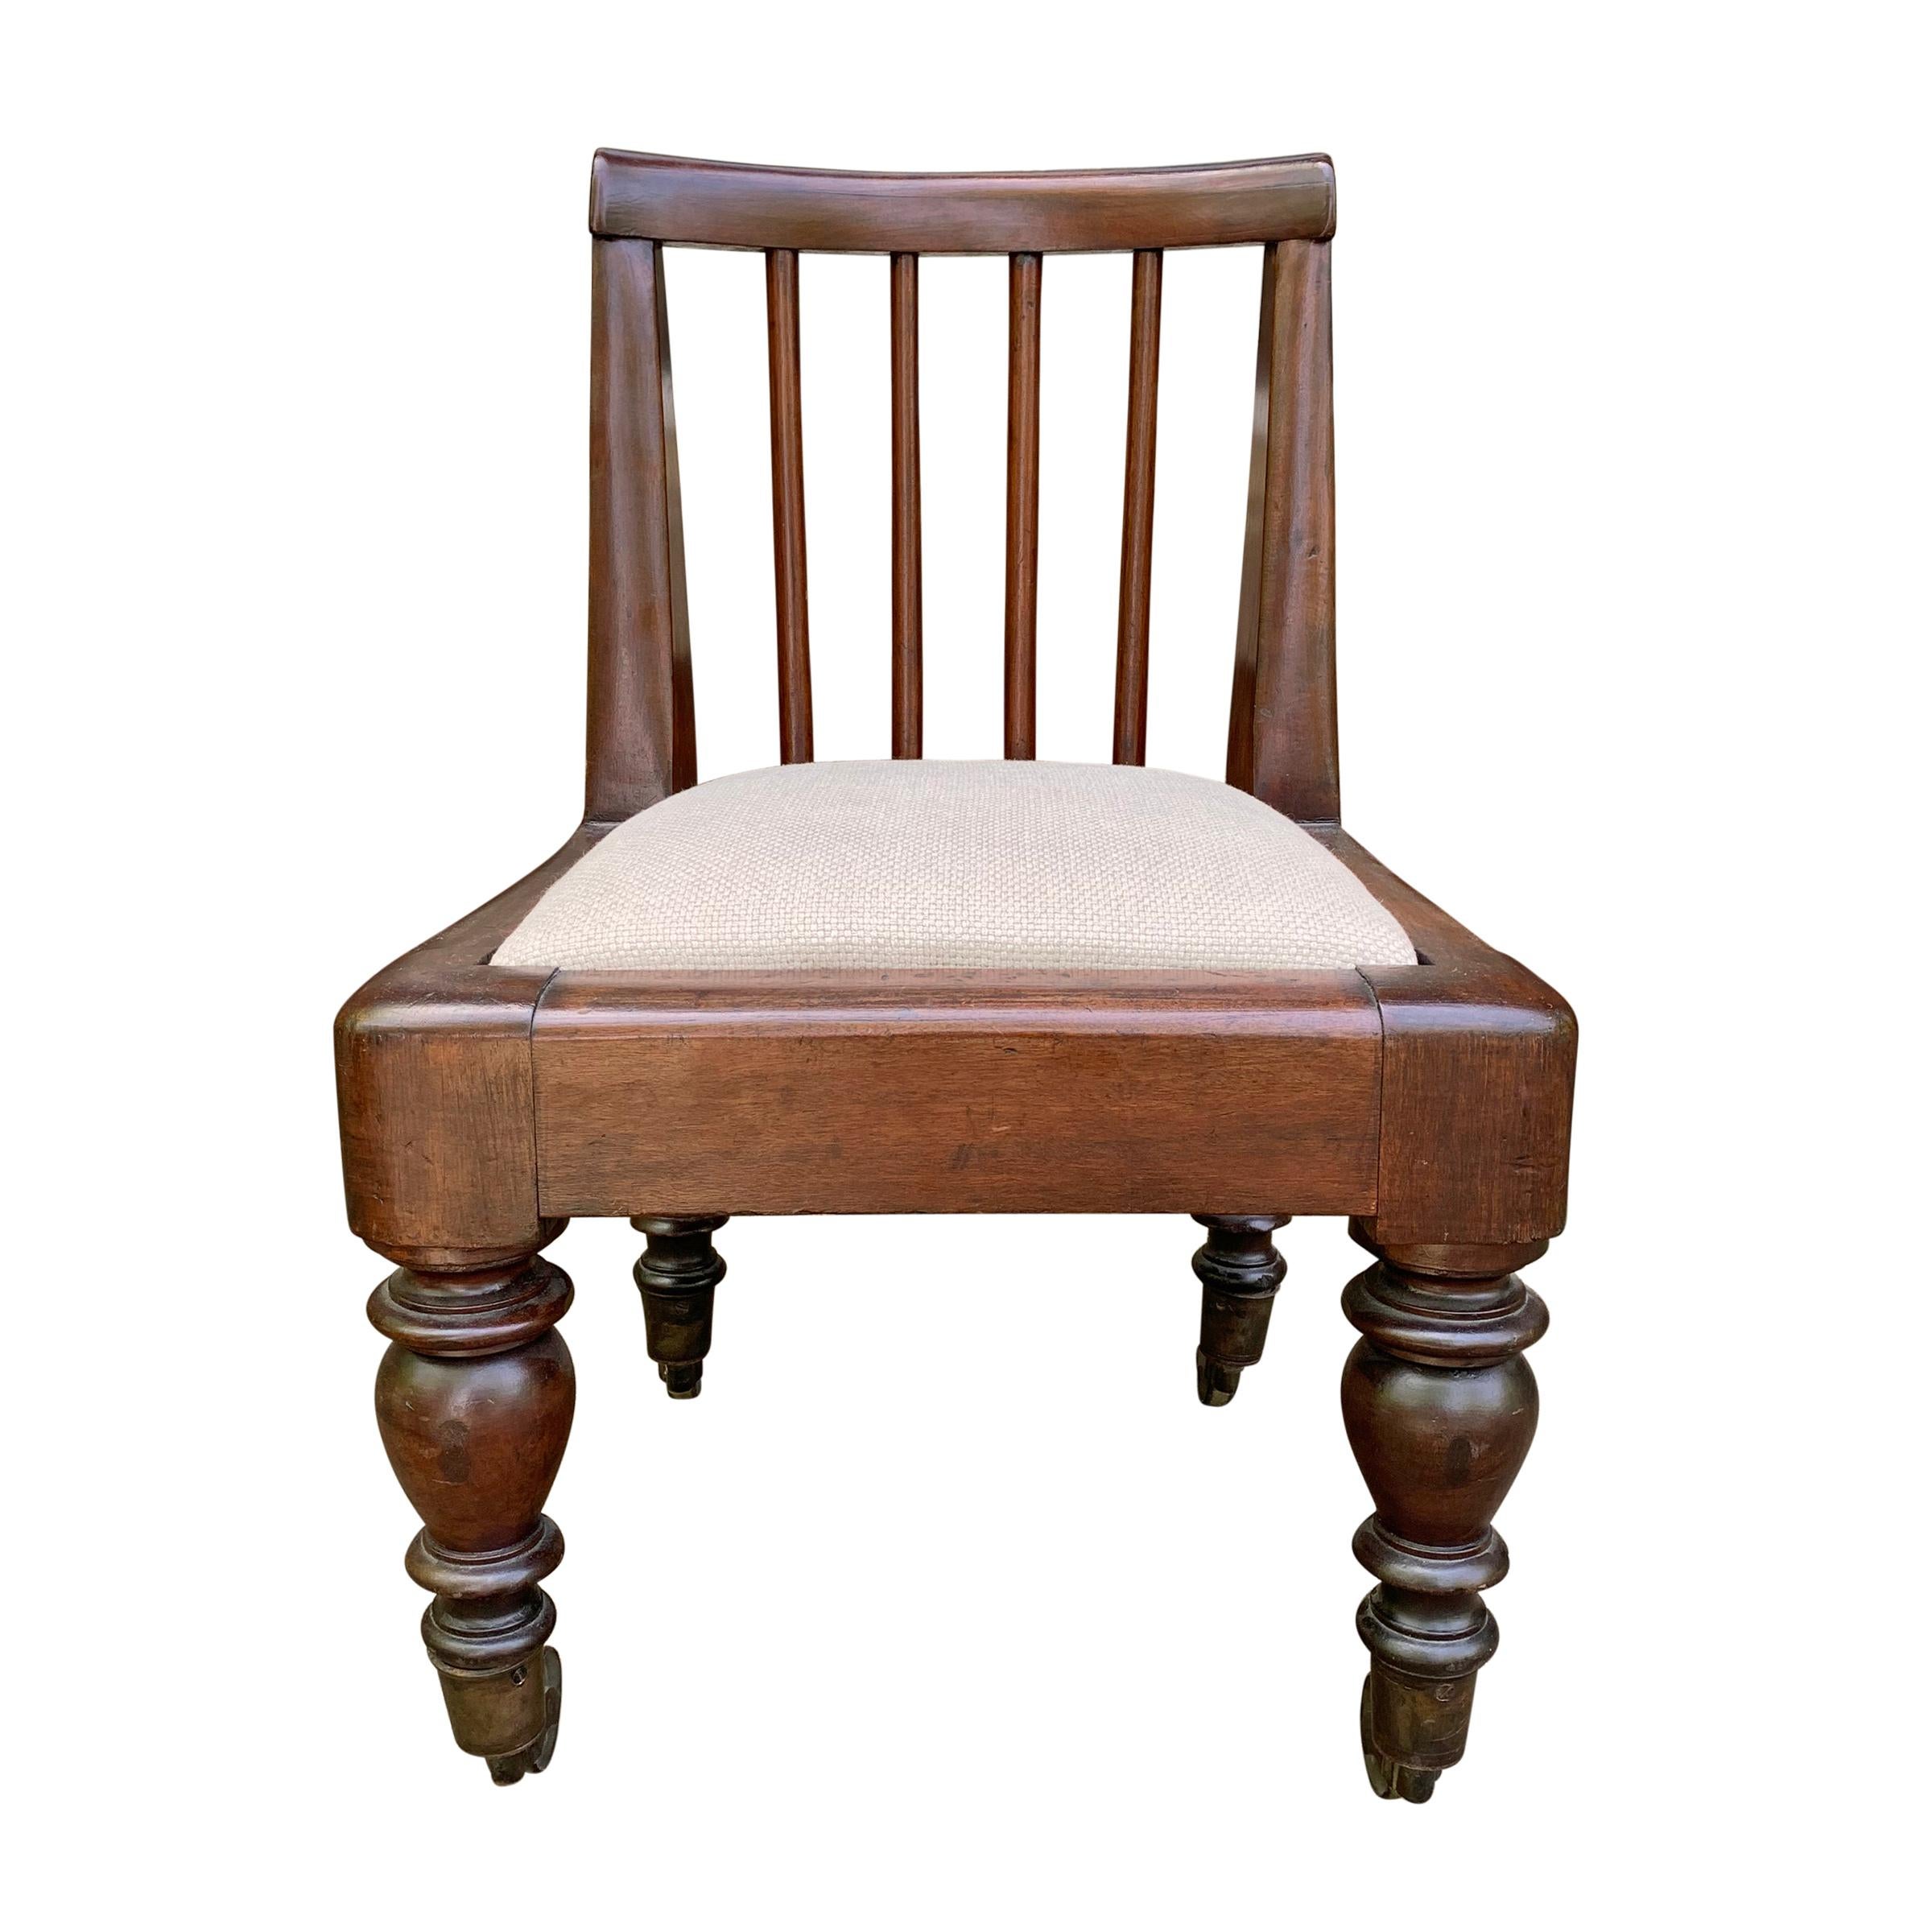 Quirky 19th Century American Empire Chair